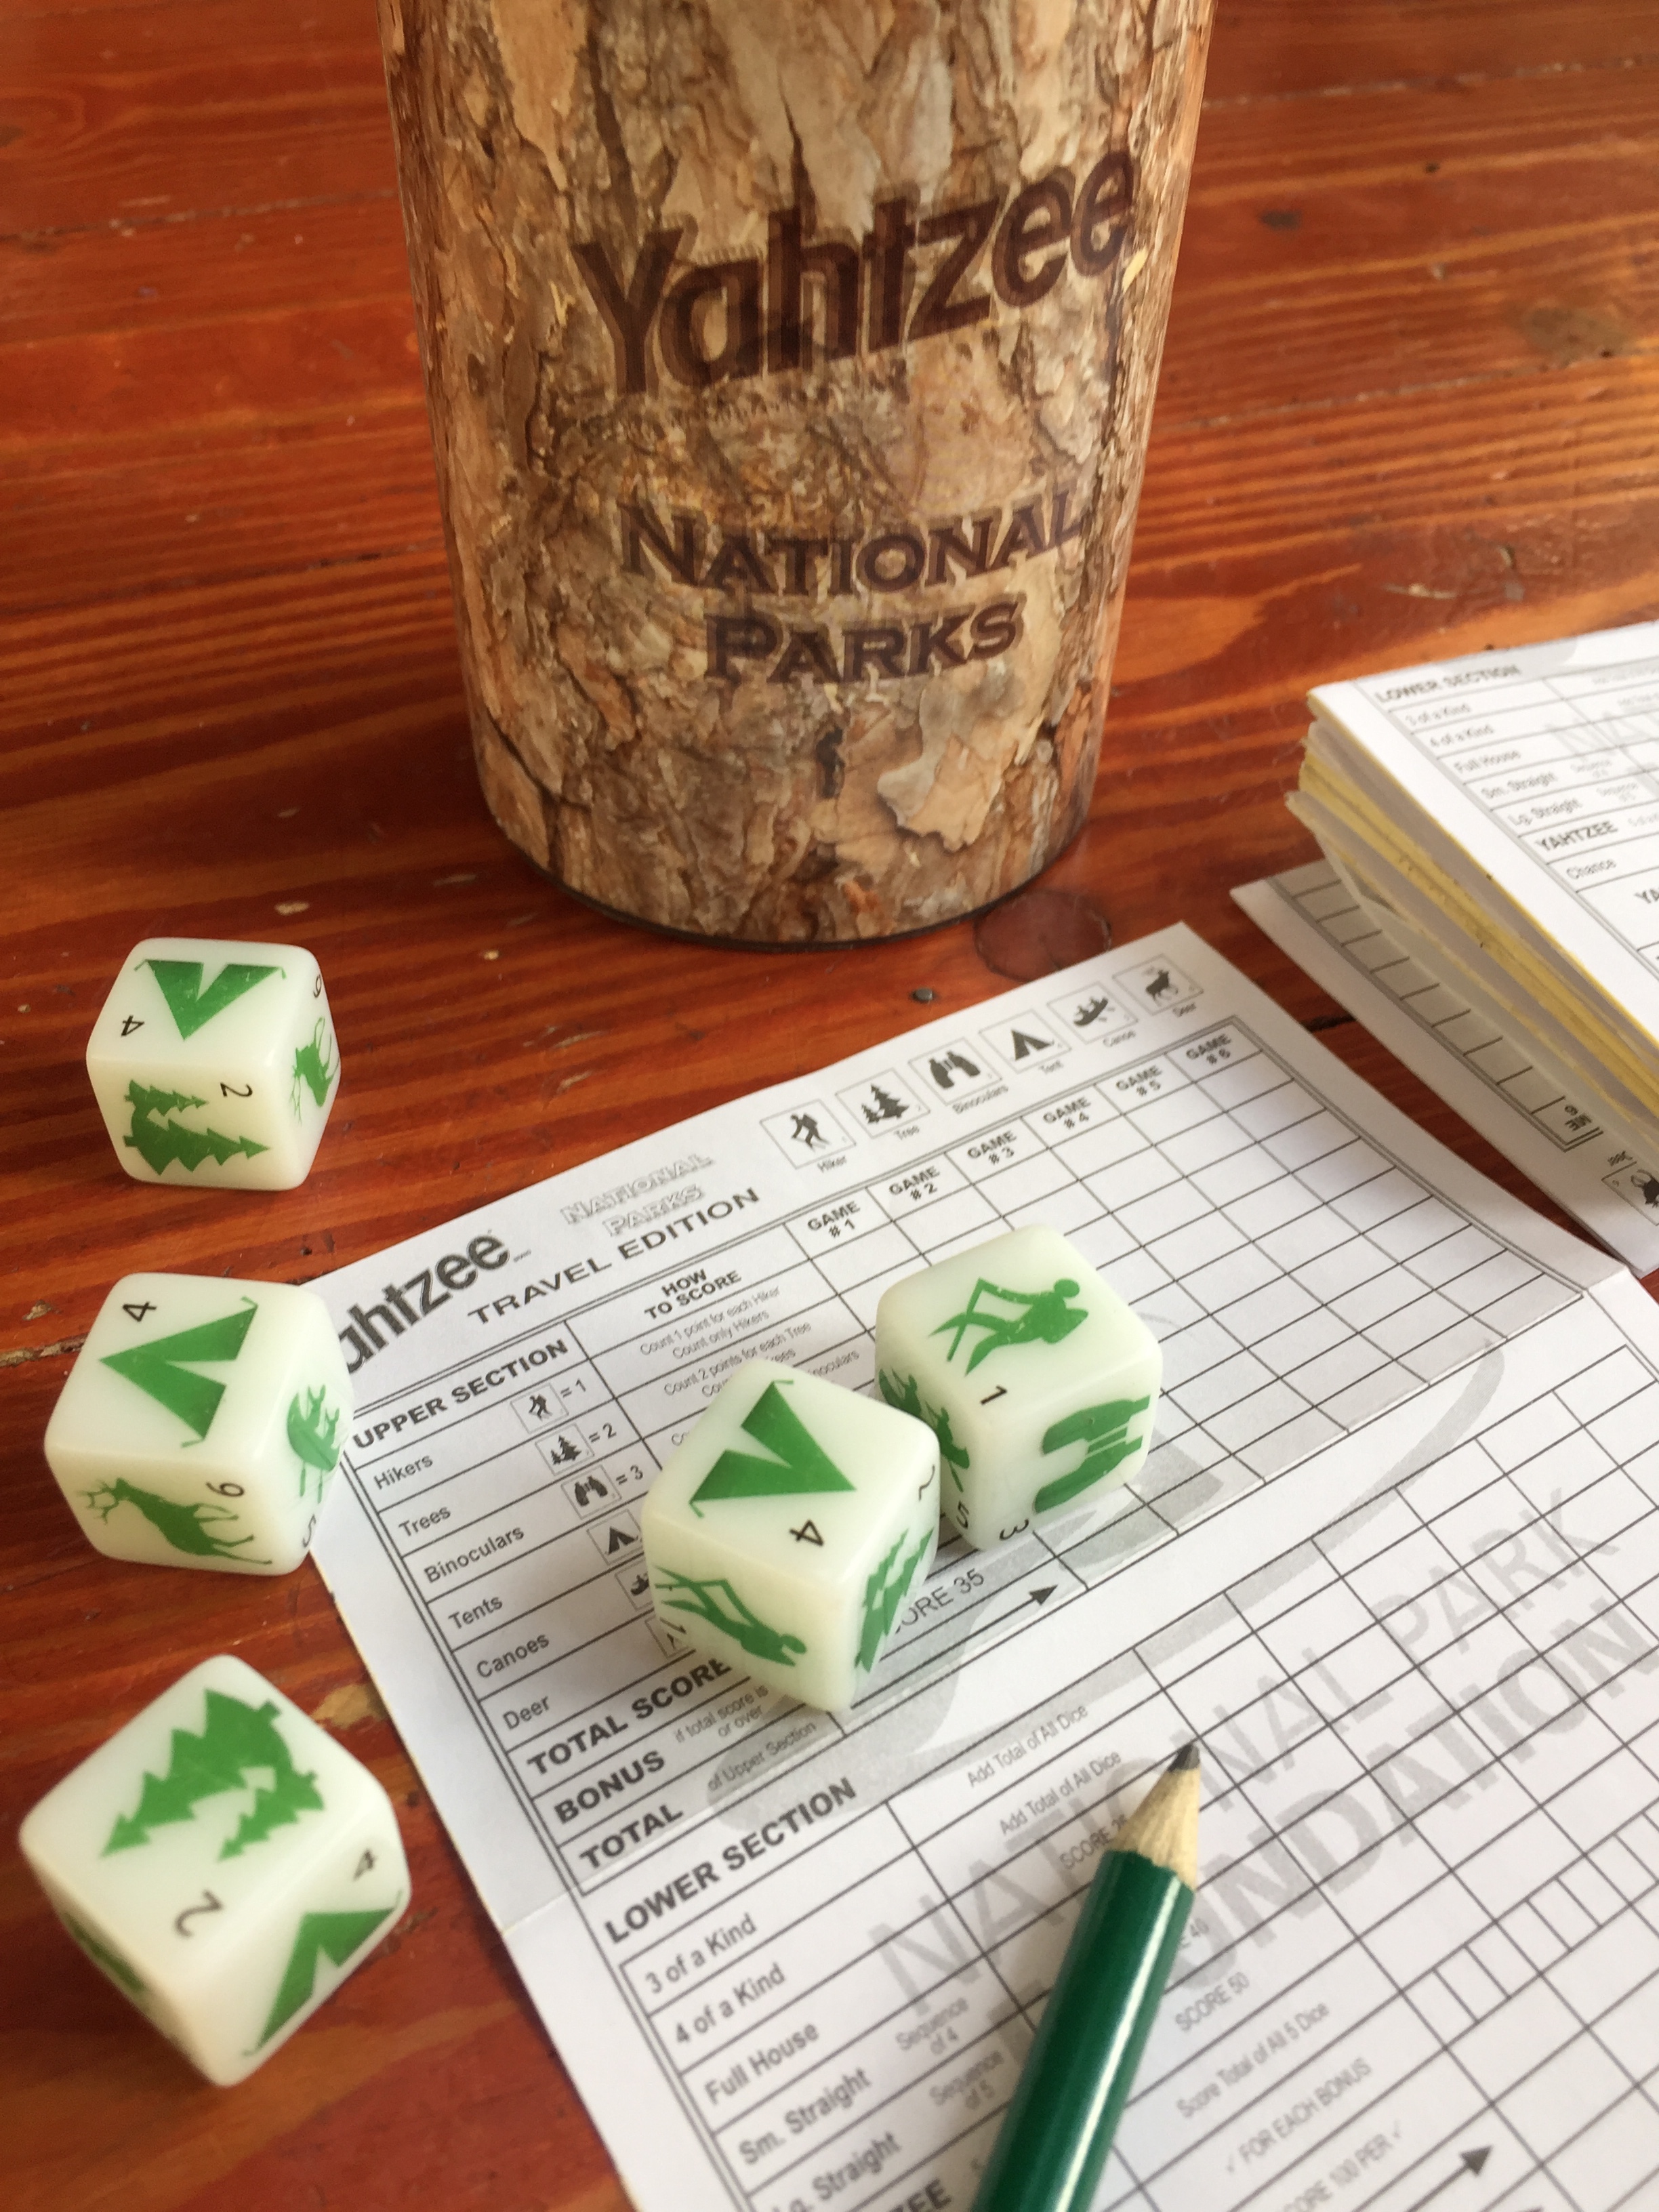 Yahtzee family dice game National Parks edition with shaker, dice, pencil, and scoring sheet